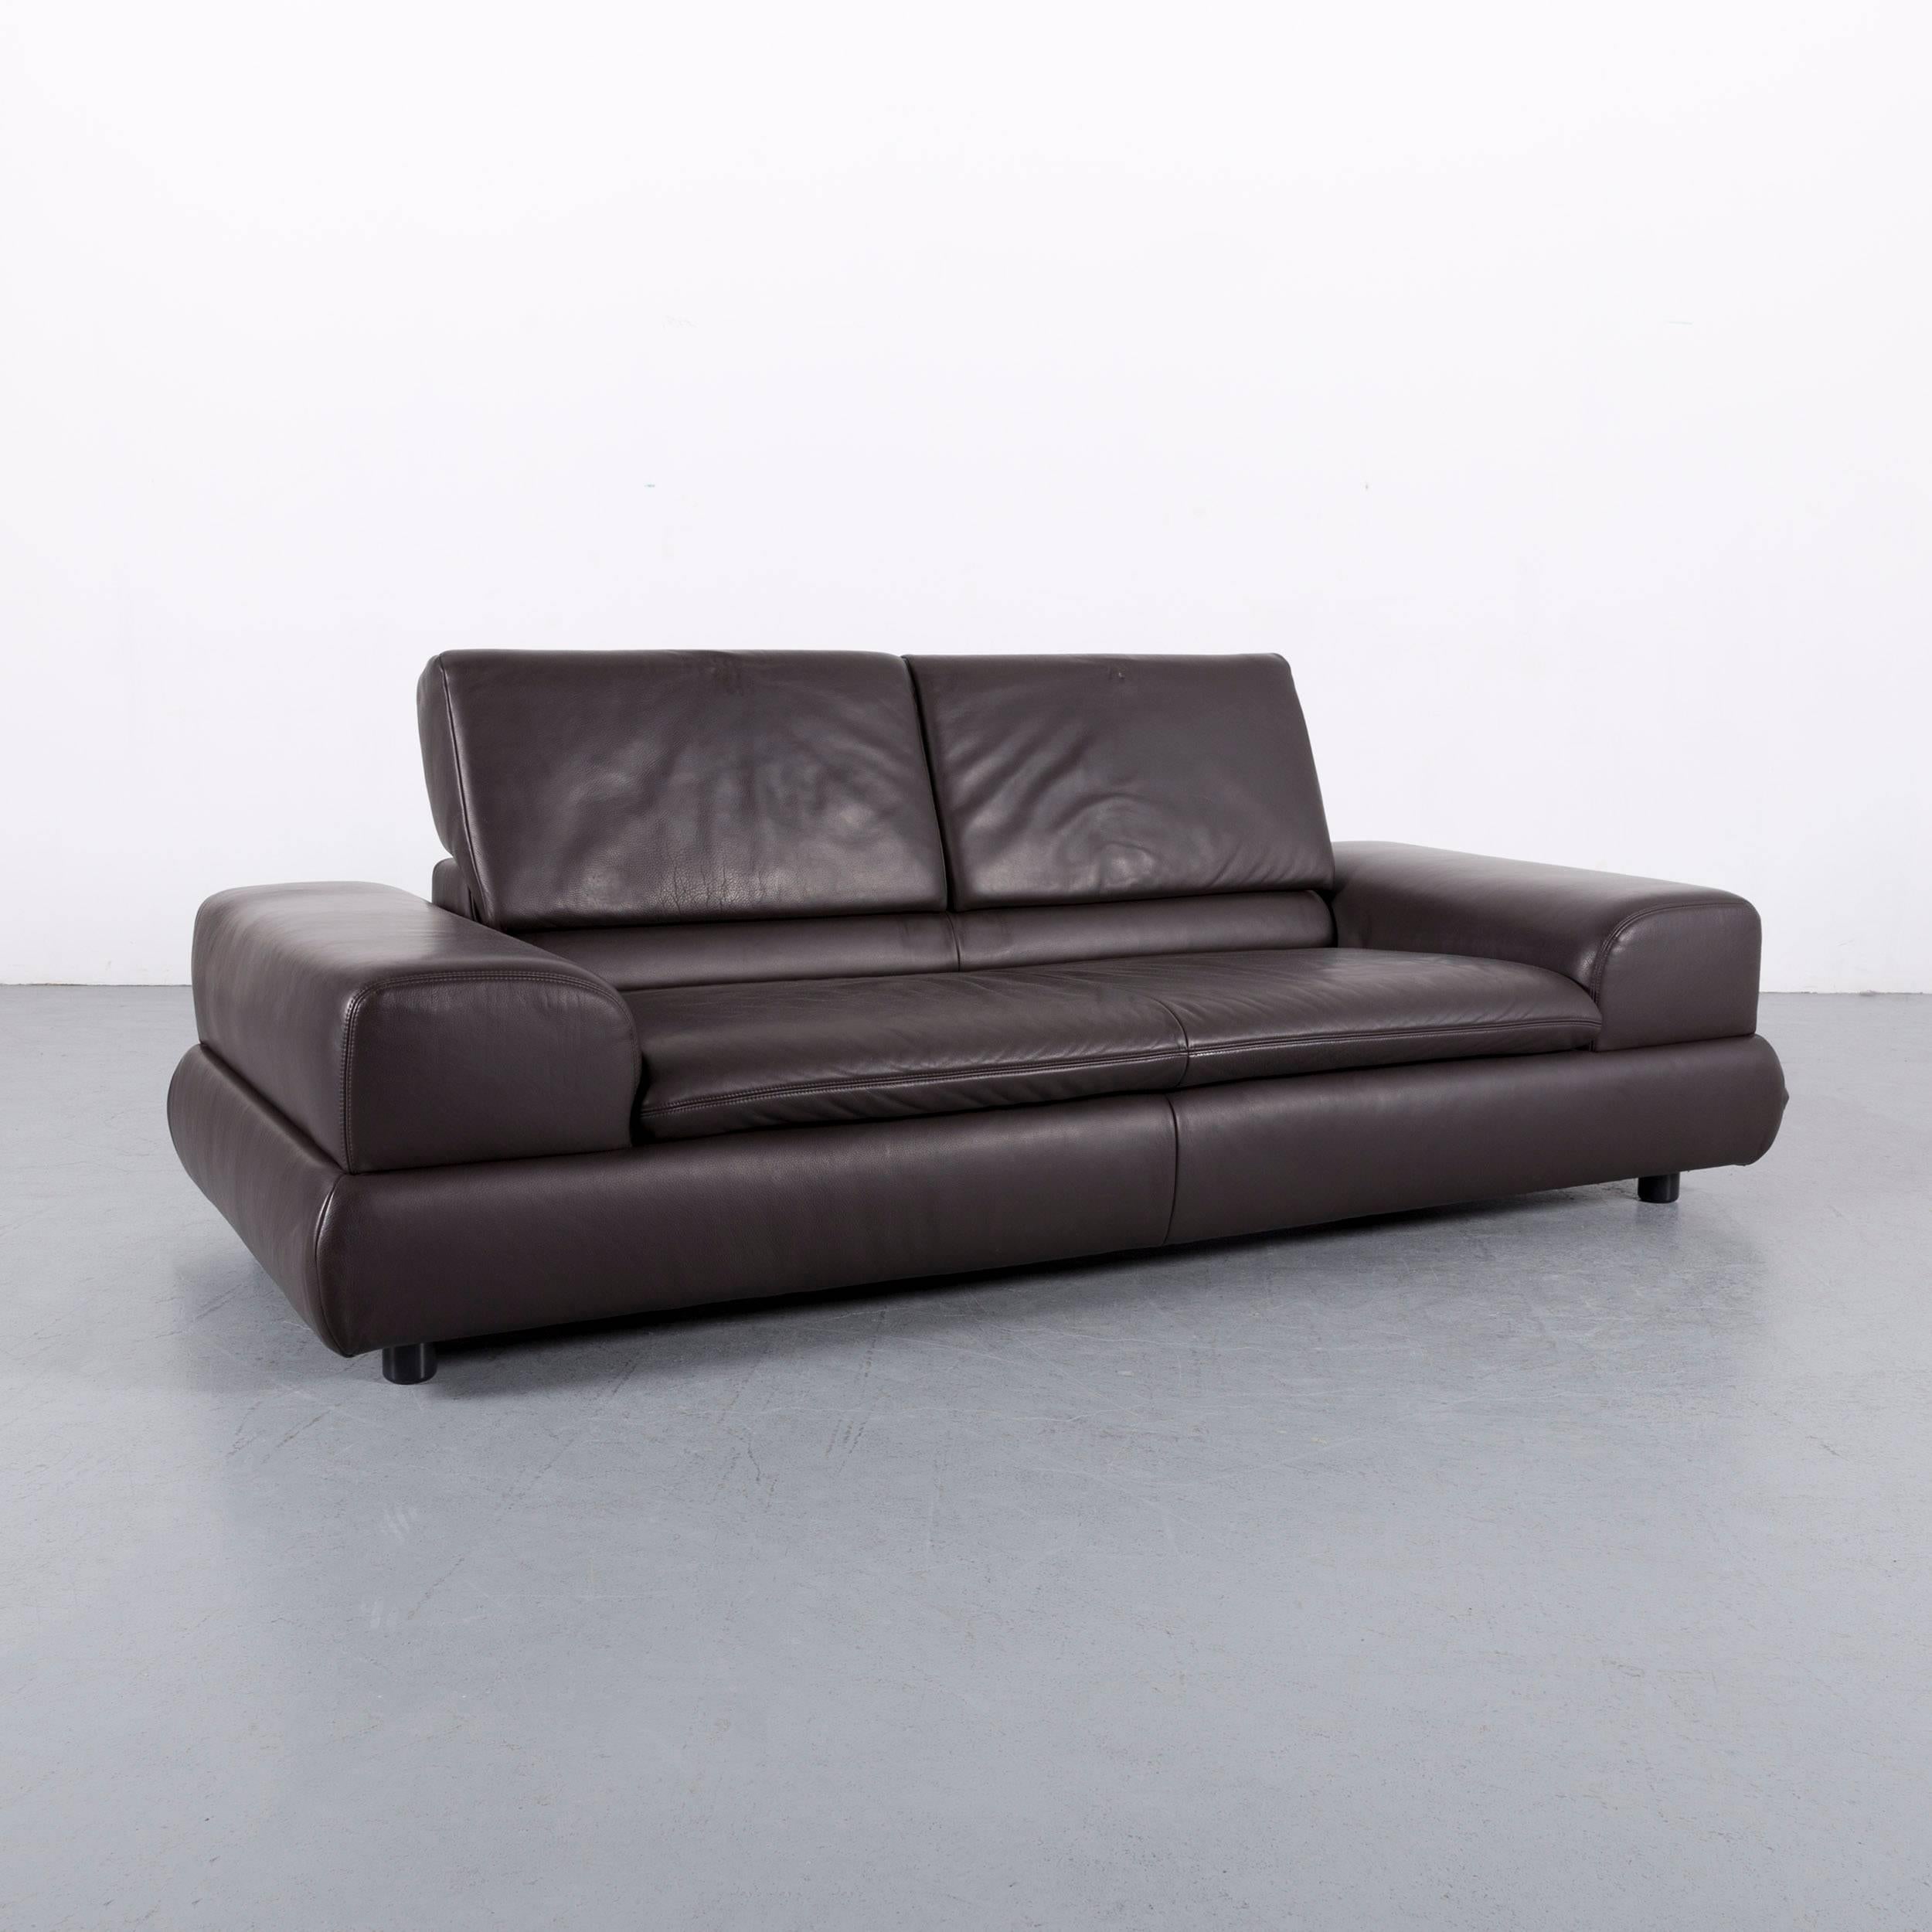 Koinor Designer Three-Seat Sofa Couch Brown Leather Function In Good Condition For Sale In Cologne, DE